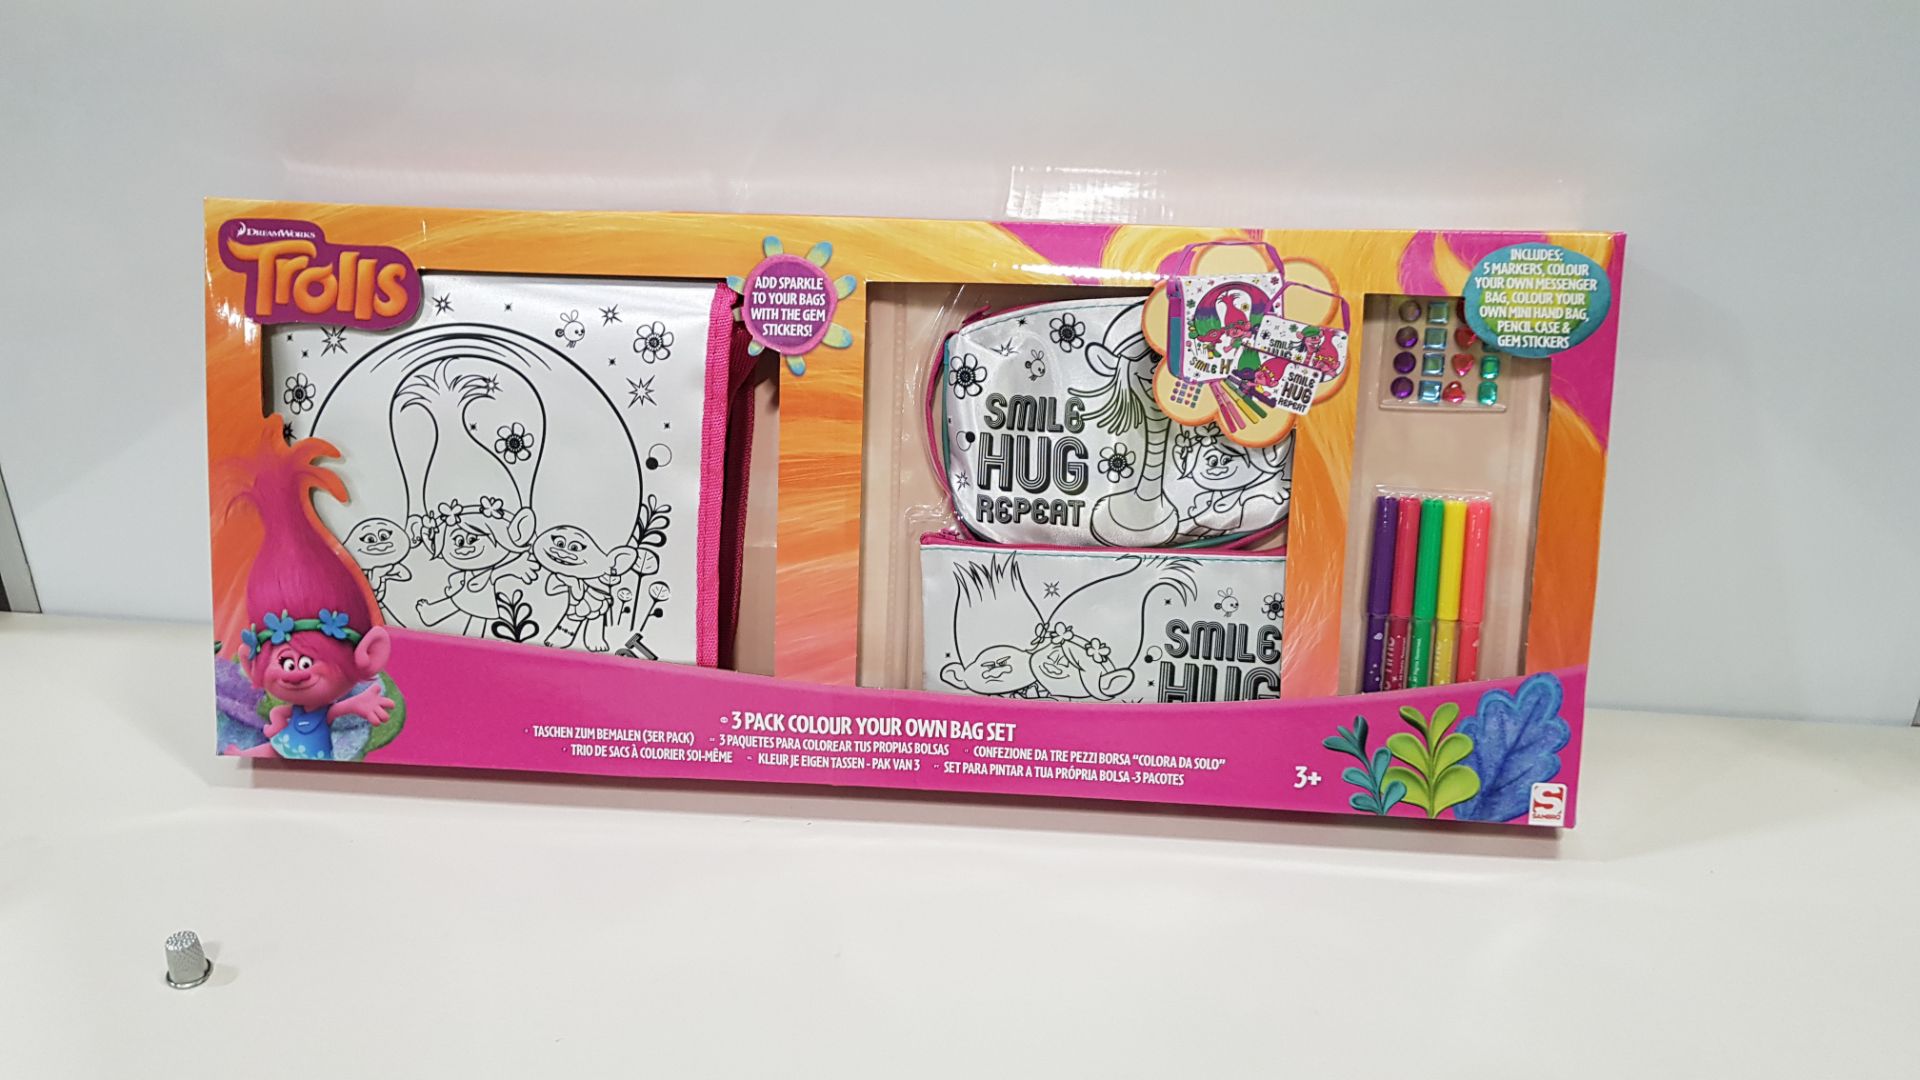 30 X BRAND NEW NICKELODEON TROLLS SET OF 3 COLOUR YOUR OWN BAGS INCLUDES MARKERS, YOUR OWN BAG, HAND